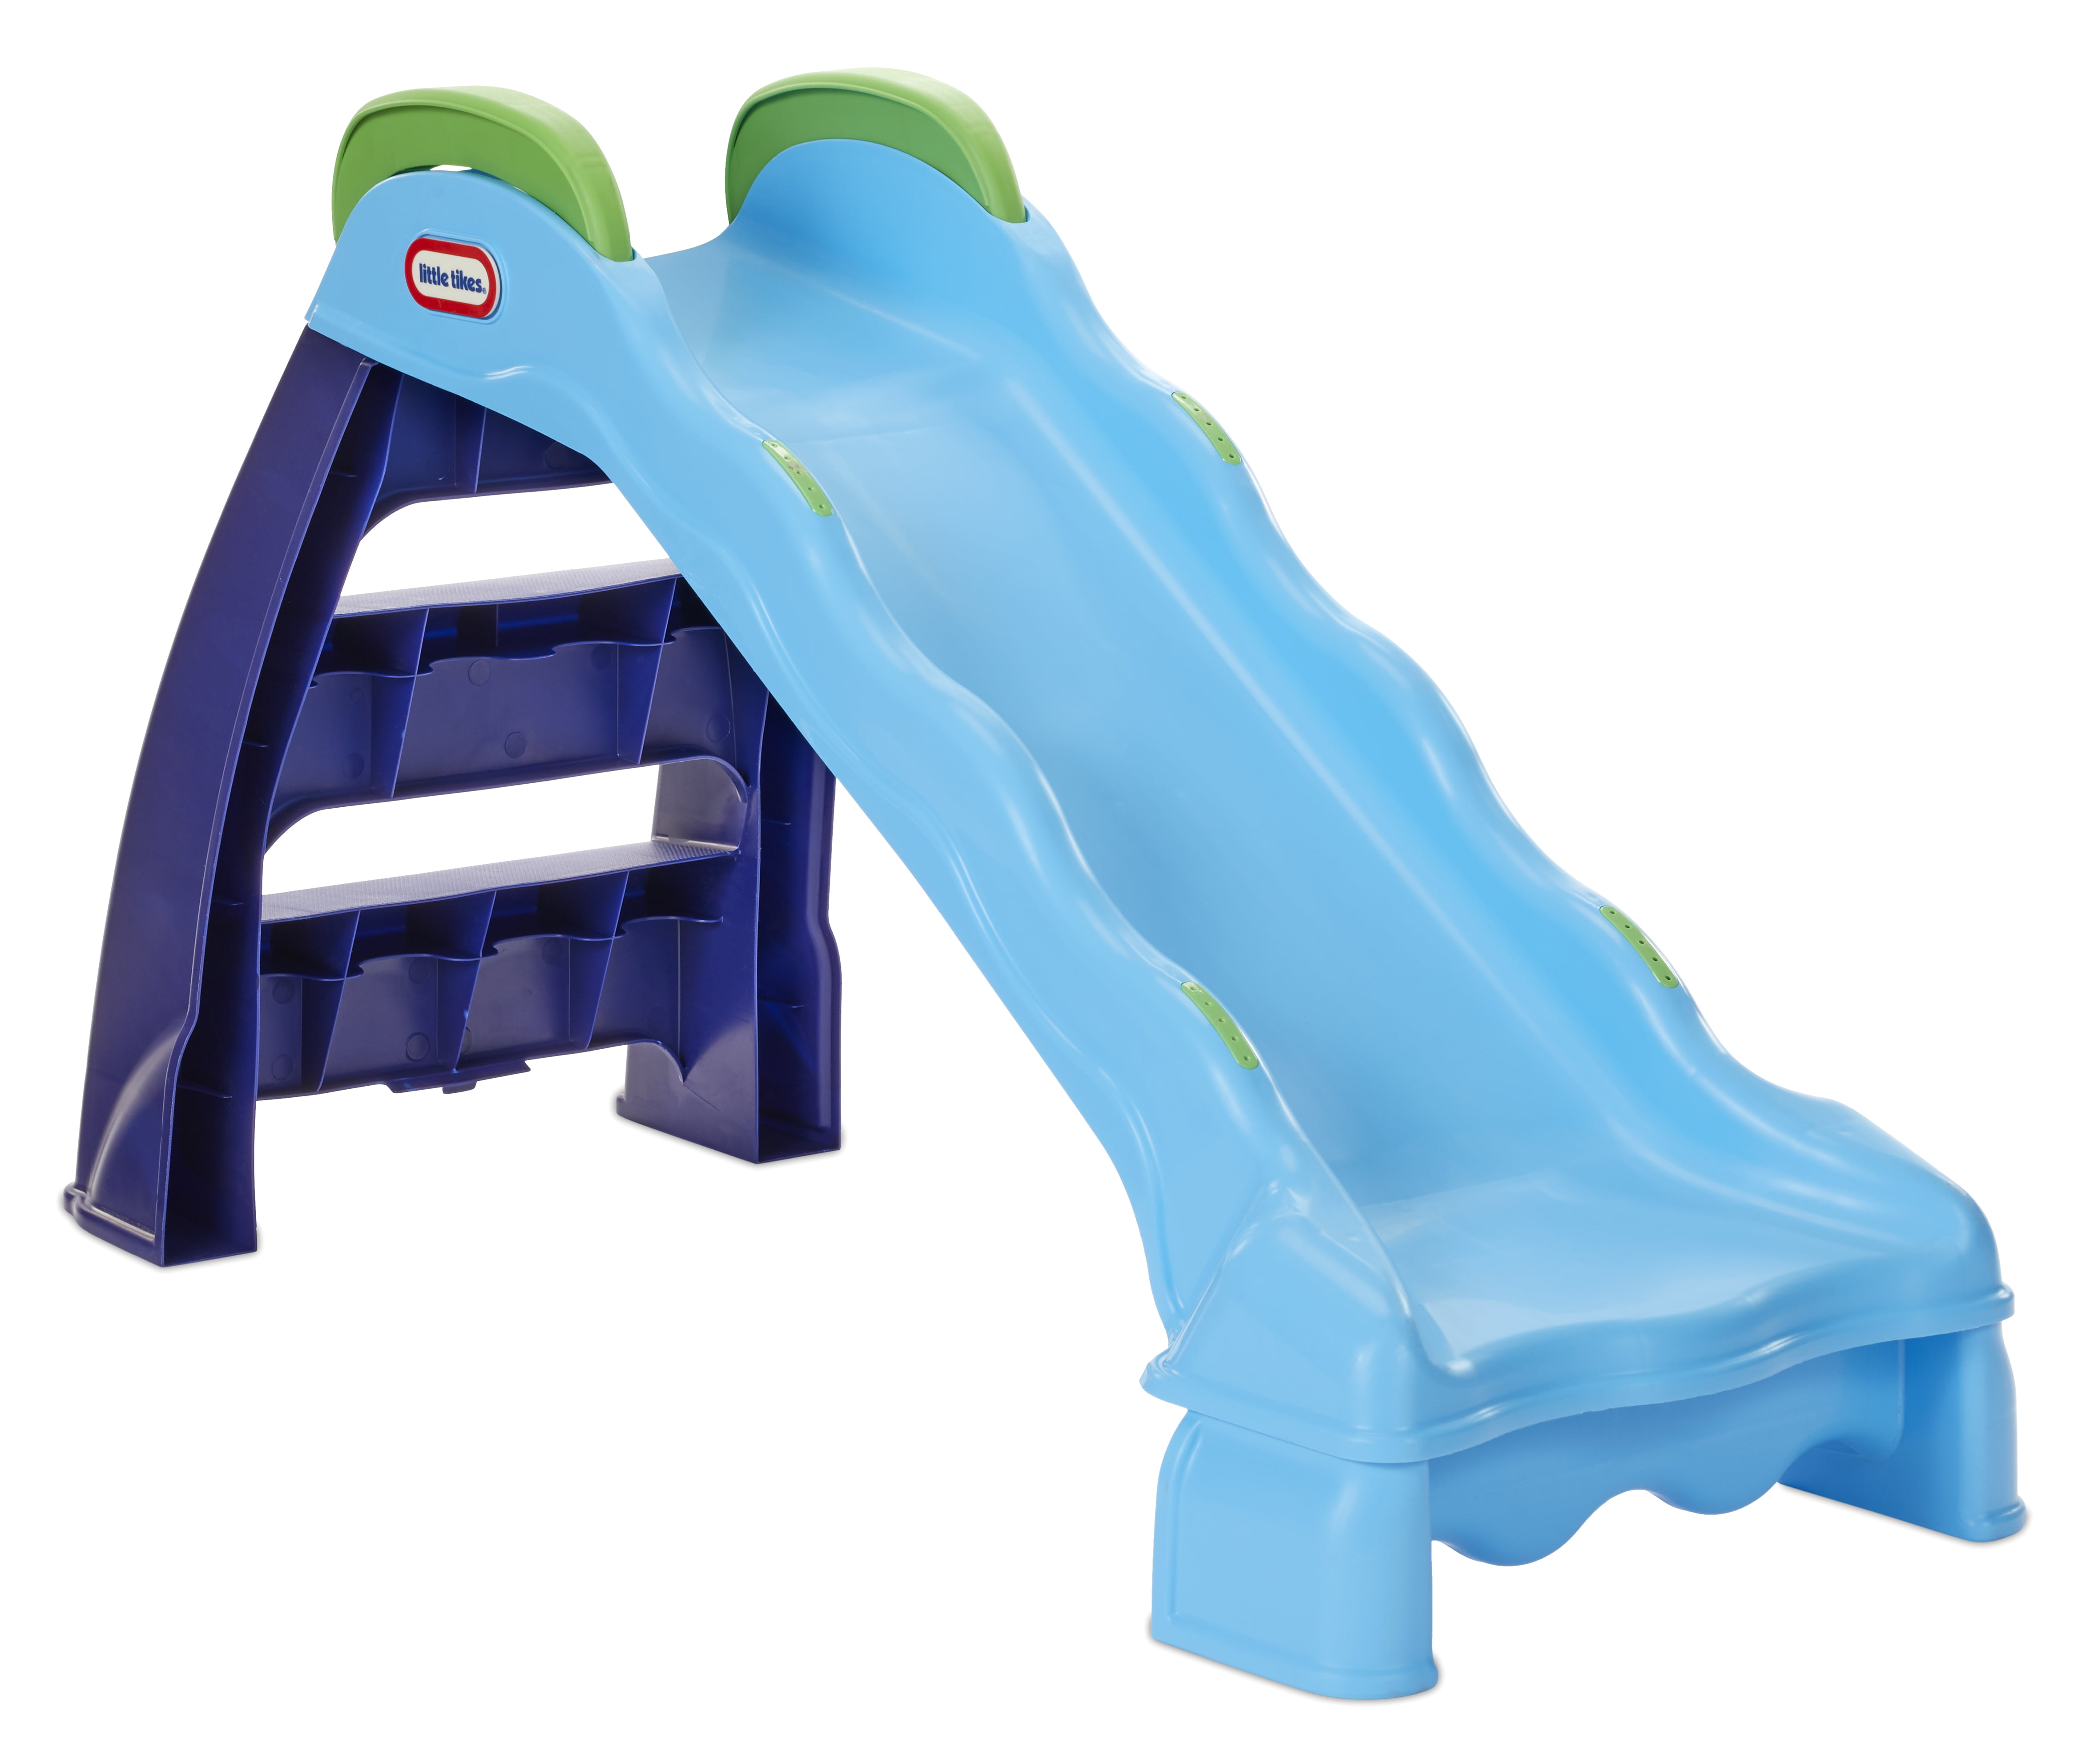 Little Tikes blue wet or dry playground slide for toddlers